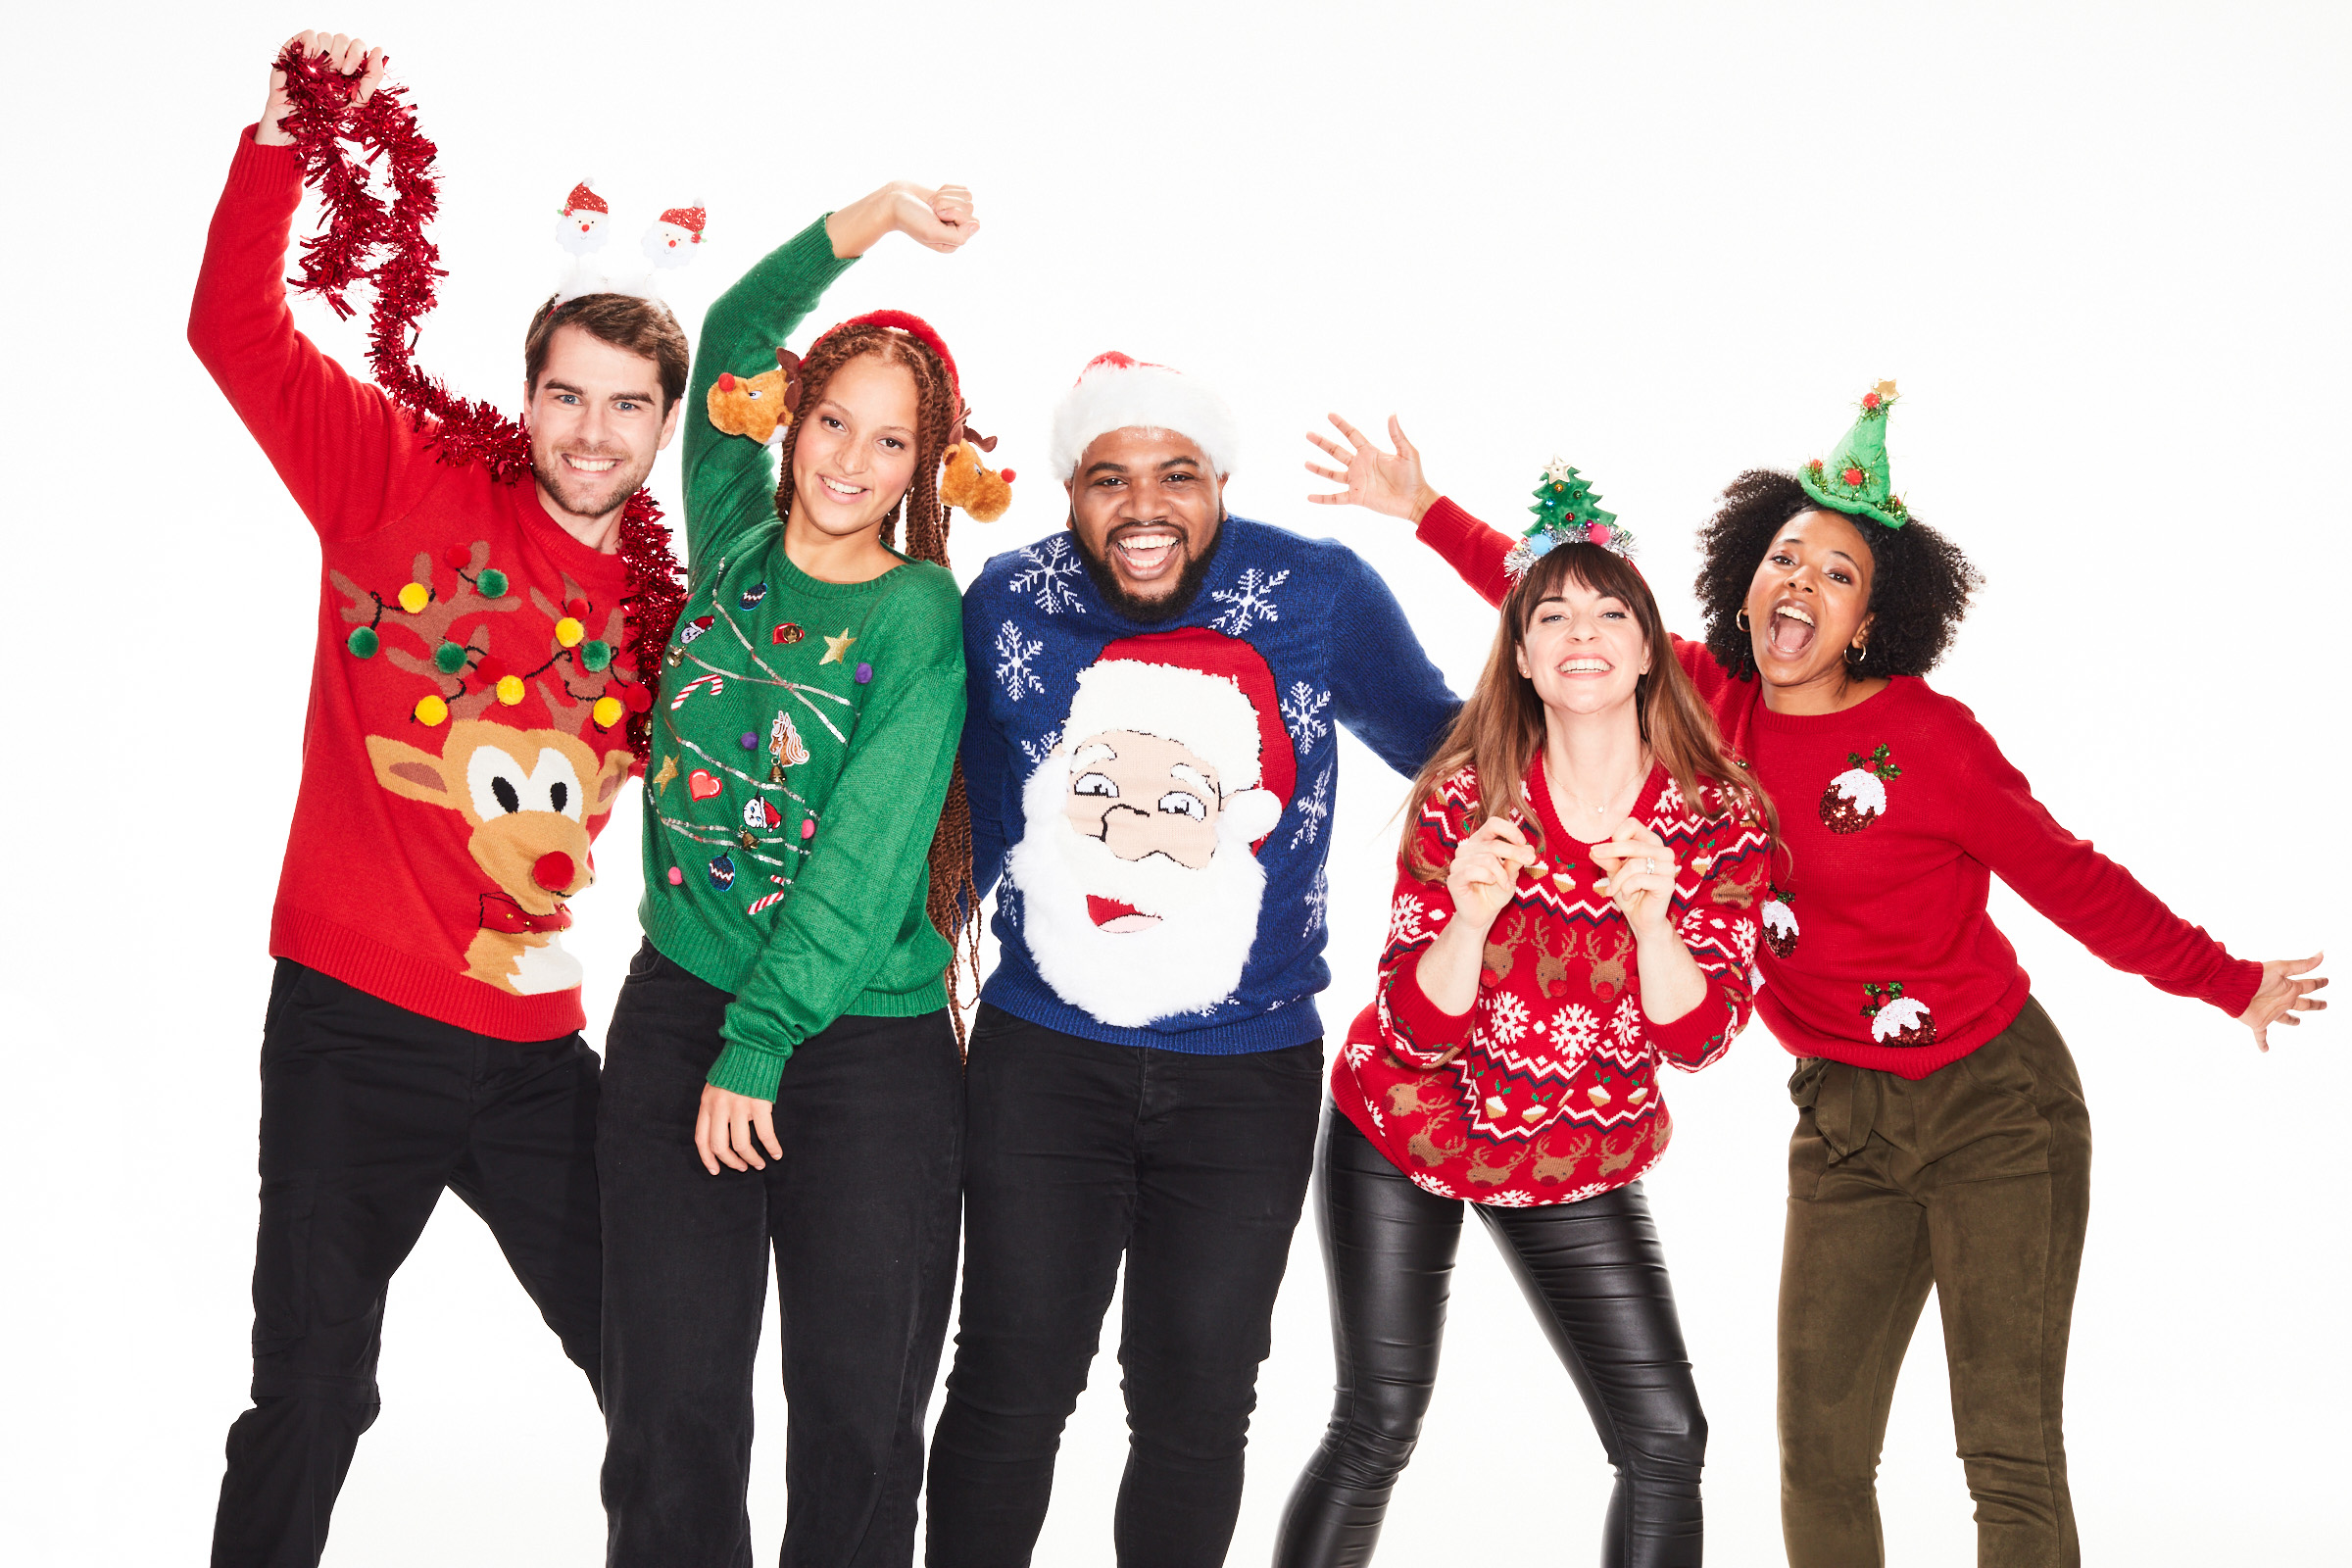 Jazz your jumper at Westfield London this Christmas Jumper Day